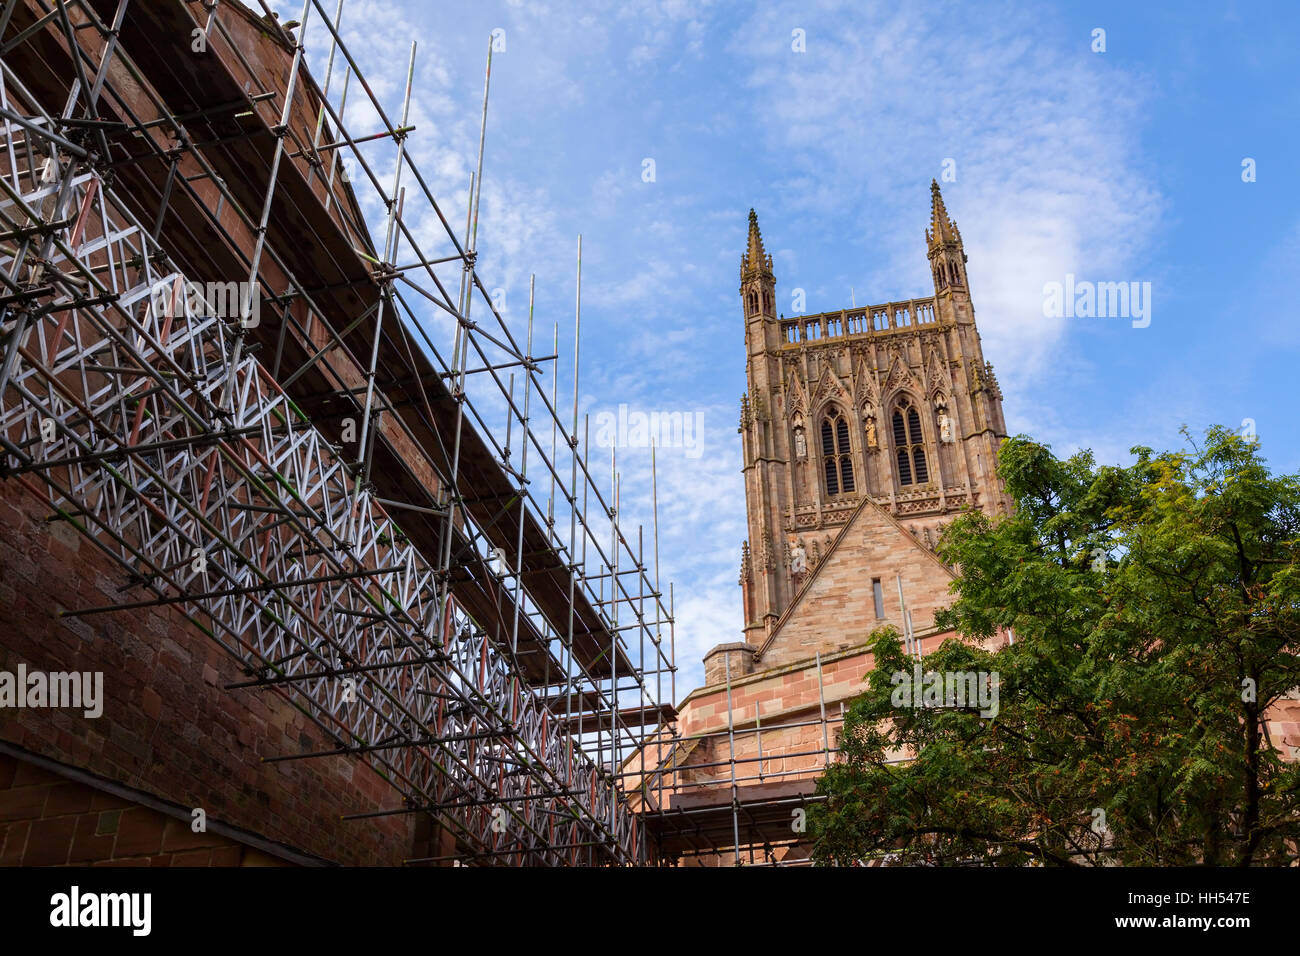 The Worcester Cathedral and scaffolding in Worcester, Worcestershire, West Midlands, England, UK. Stock Photo